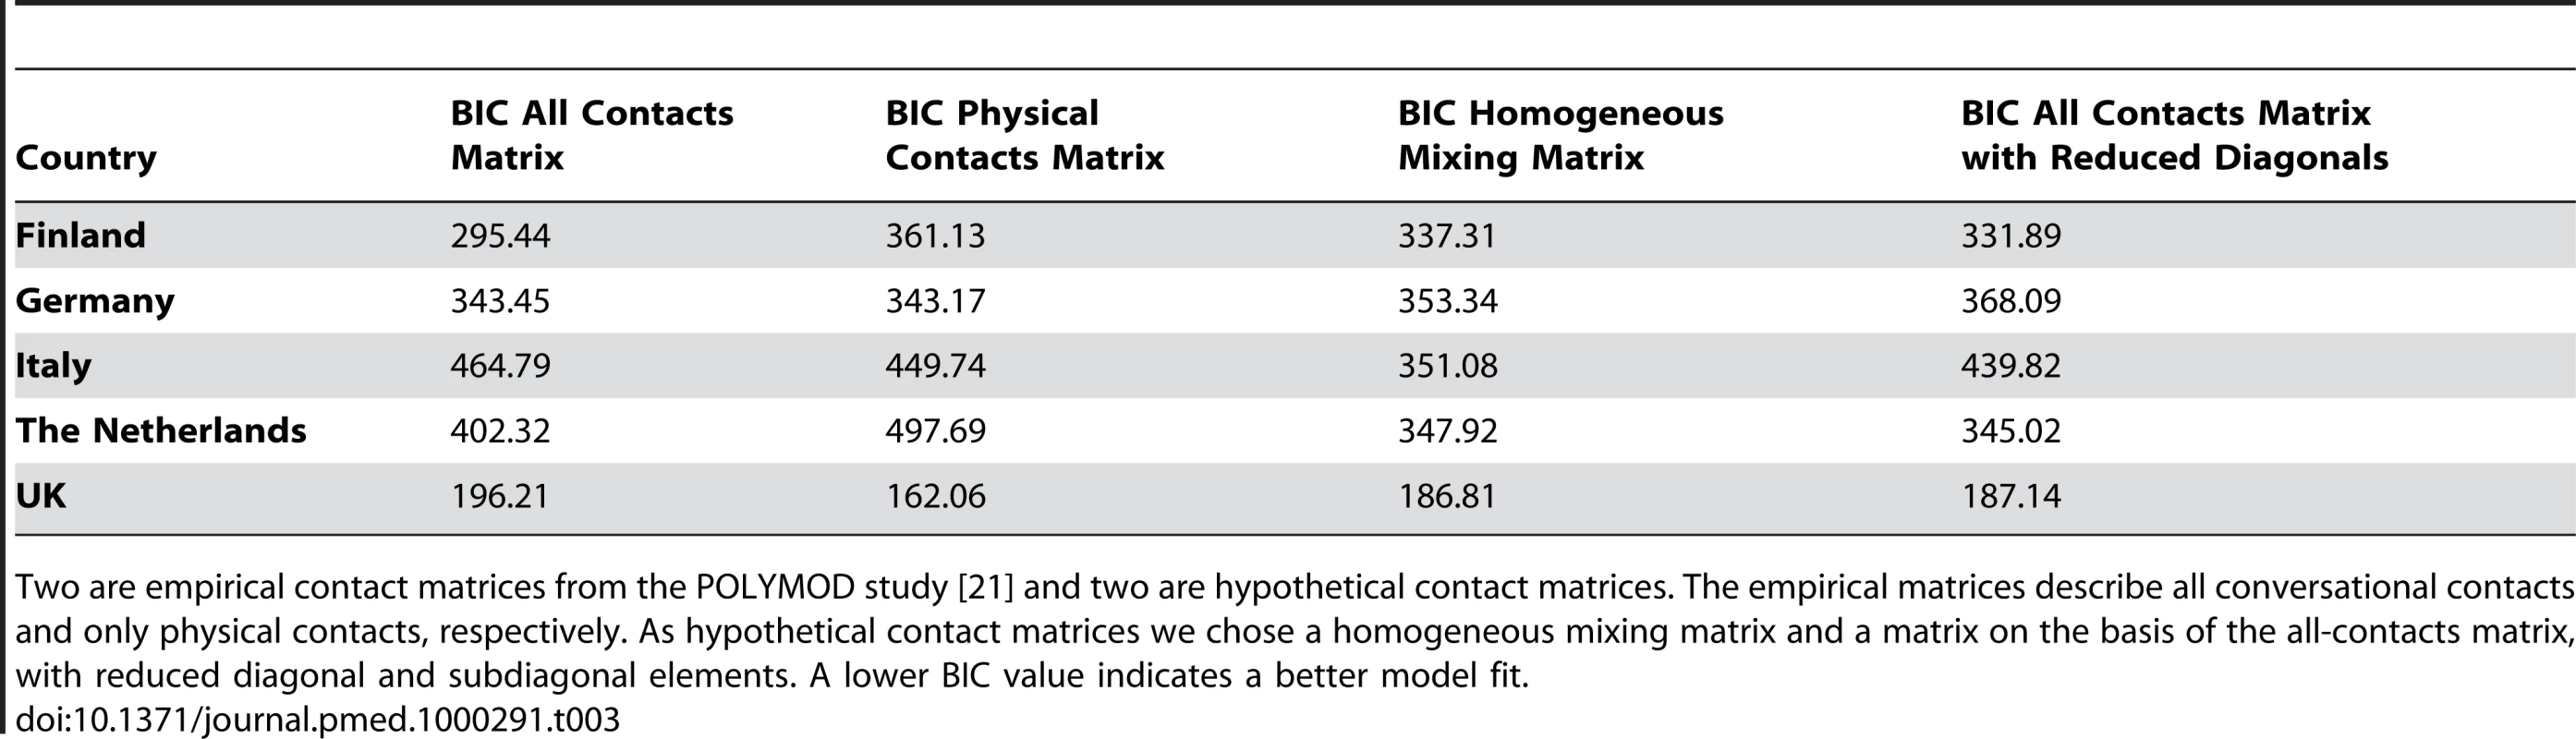 BIC values for model fit with four different contact matrices.